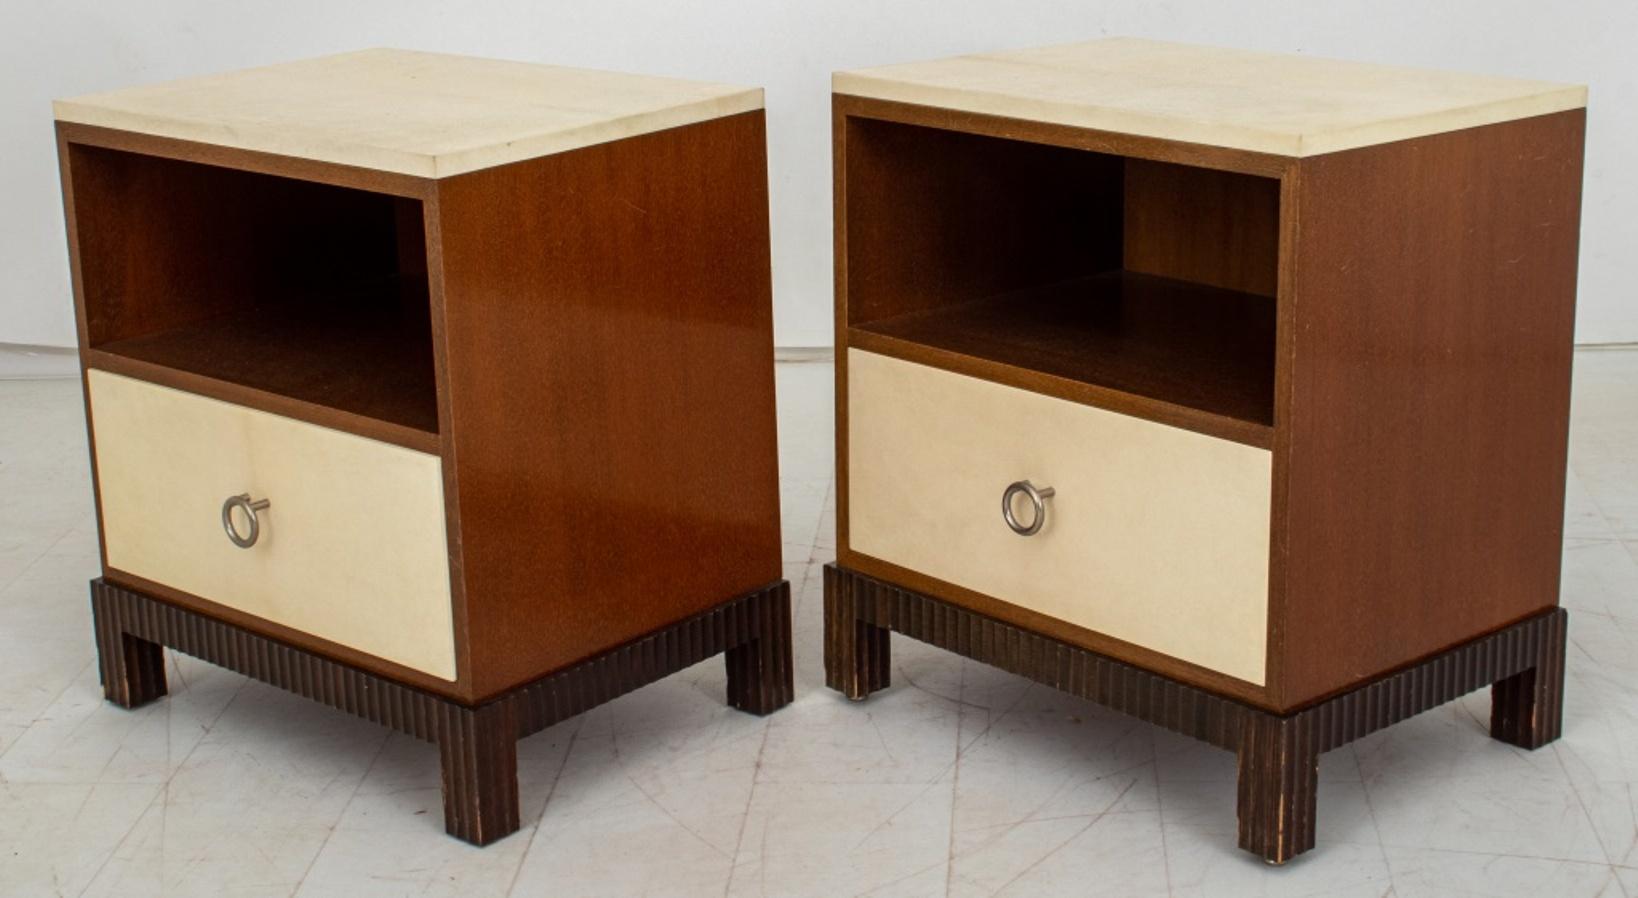 Pair of John Fischer Furniture parchment end tables, each with rectangular parchment surface above a mahogany recess over a short drawer with ring pull above incurved plinth on conforming feet. 
Provenance: Property From a Thad Hayes Designed